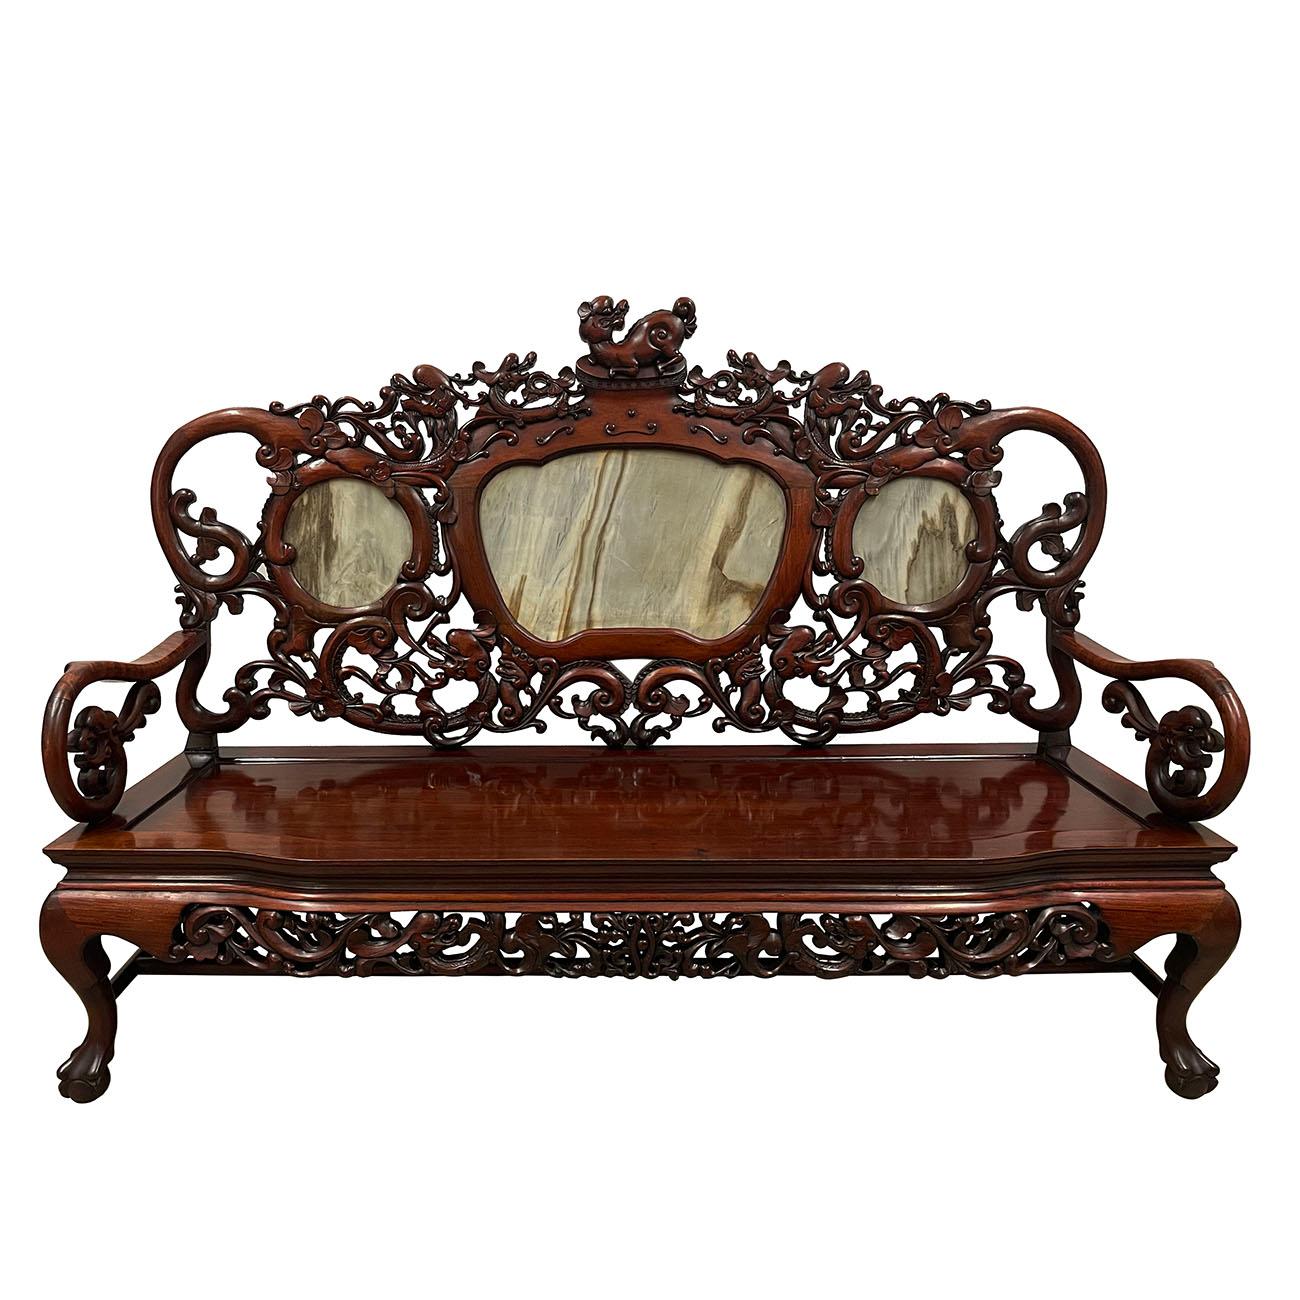 Size: 46.5in H x 70in W x 26in D?
Seat: 16in H x 65in W x 21in D
Origin: China
Circa: 1900 - 1910
Material: Rosewood with Marble inlay
Condition: Solid wood construction, hand carved, very heavy, sturdy, normal age wear.

Description: Look at